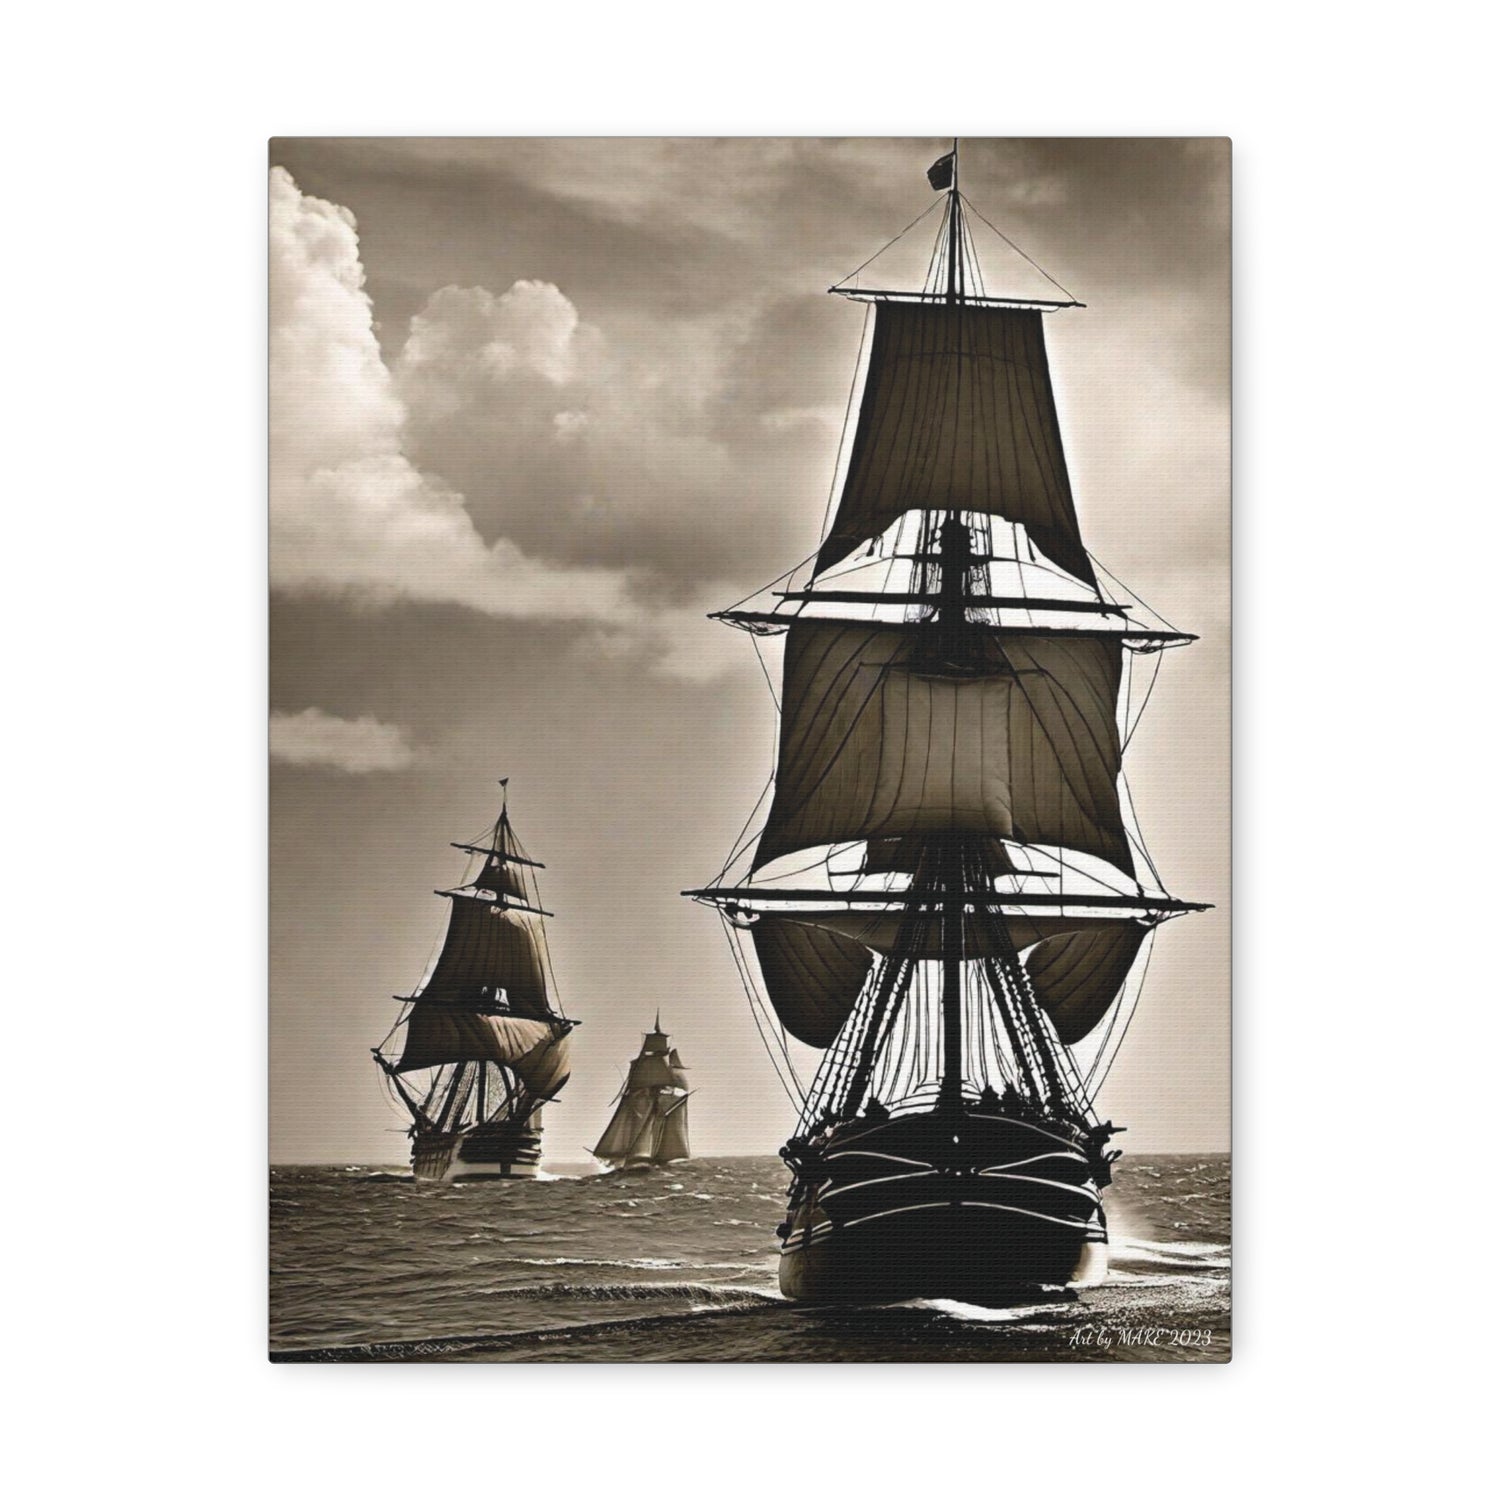 Age of Sail, Wooden Ships with Sails.